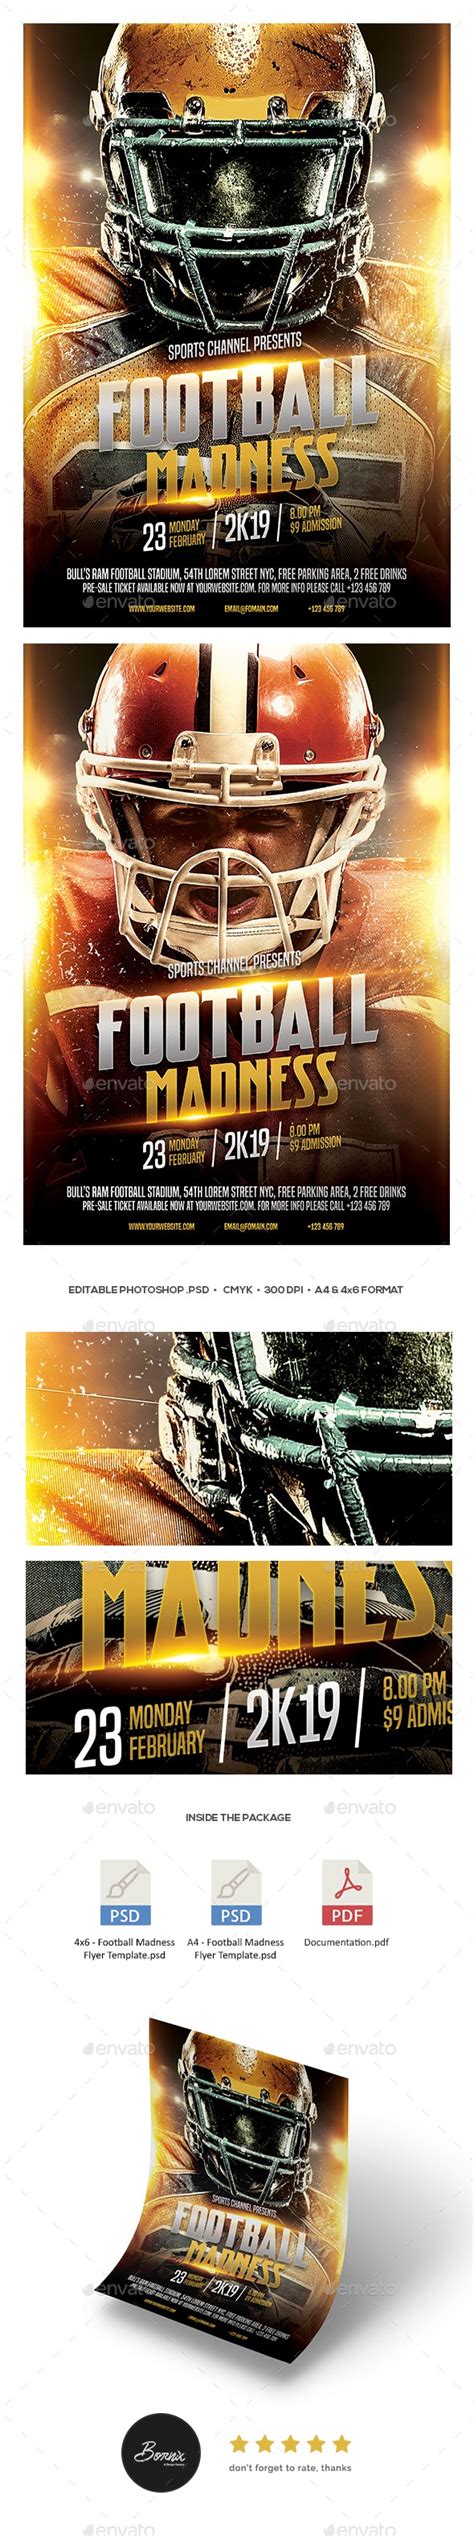 Football Madness Flyer By Bornx Graphicriver